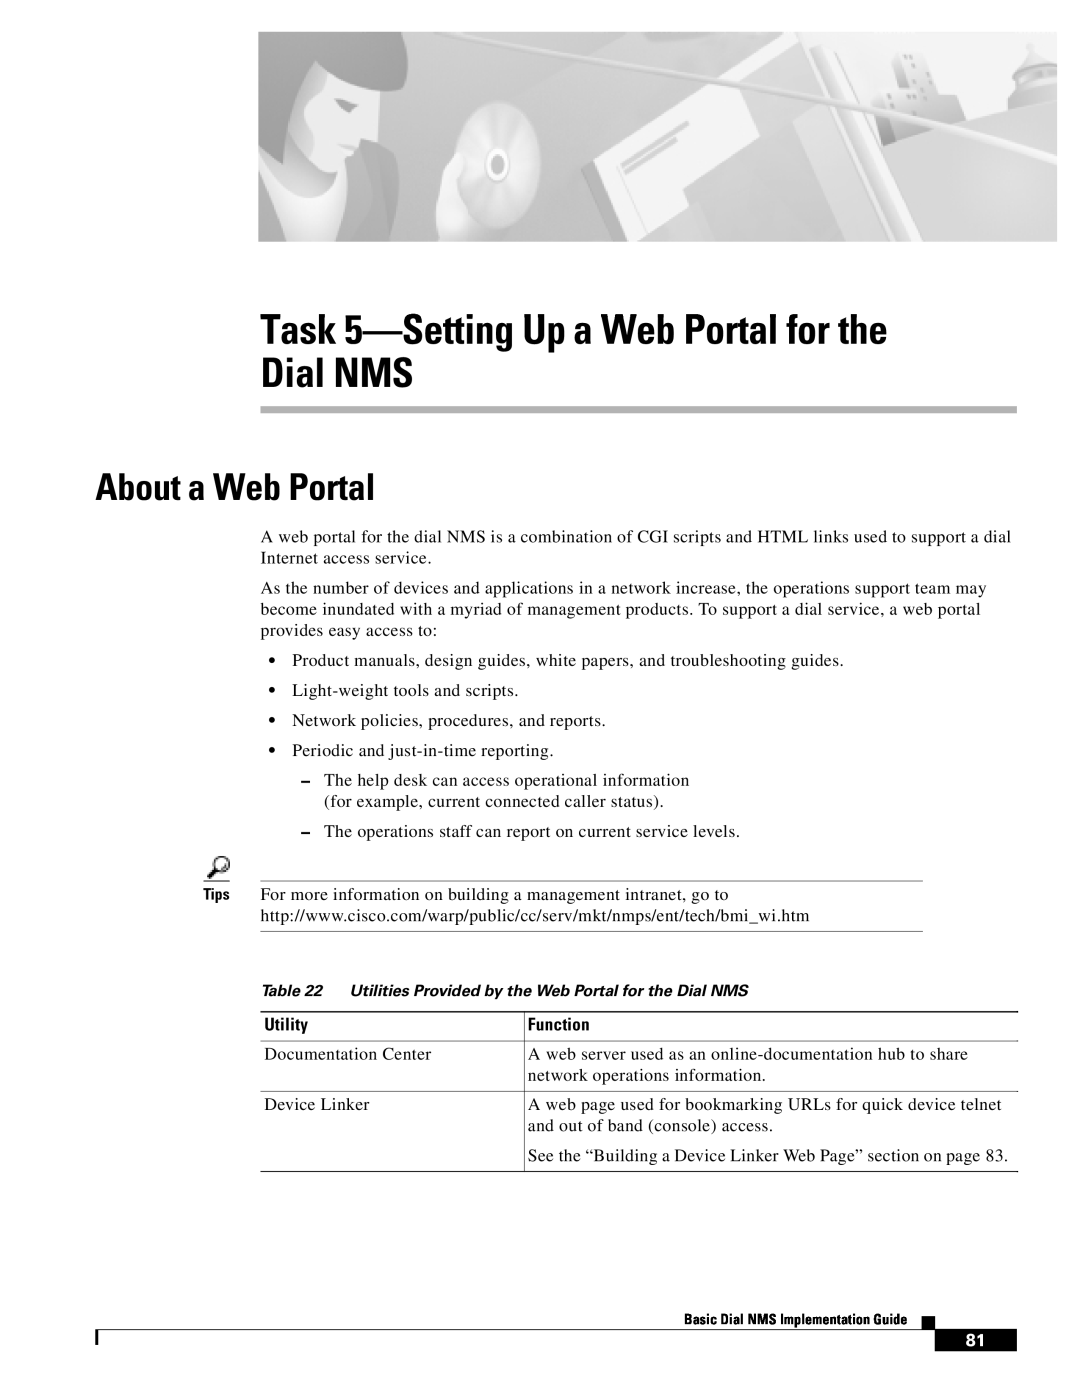 Cisco Systems manual Task 5-Setting Up a Web Portal for the Dial NMS, About a Web Portal 